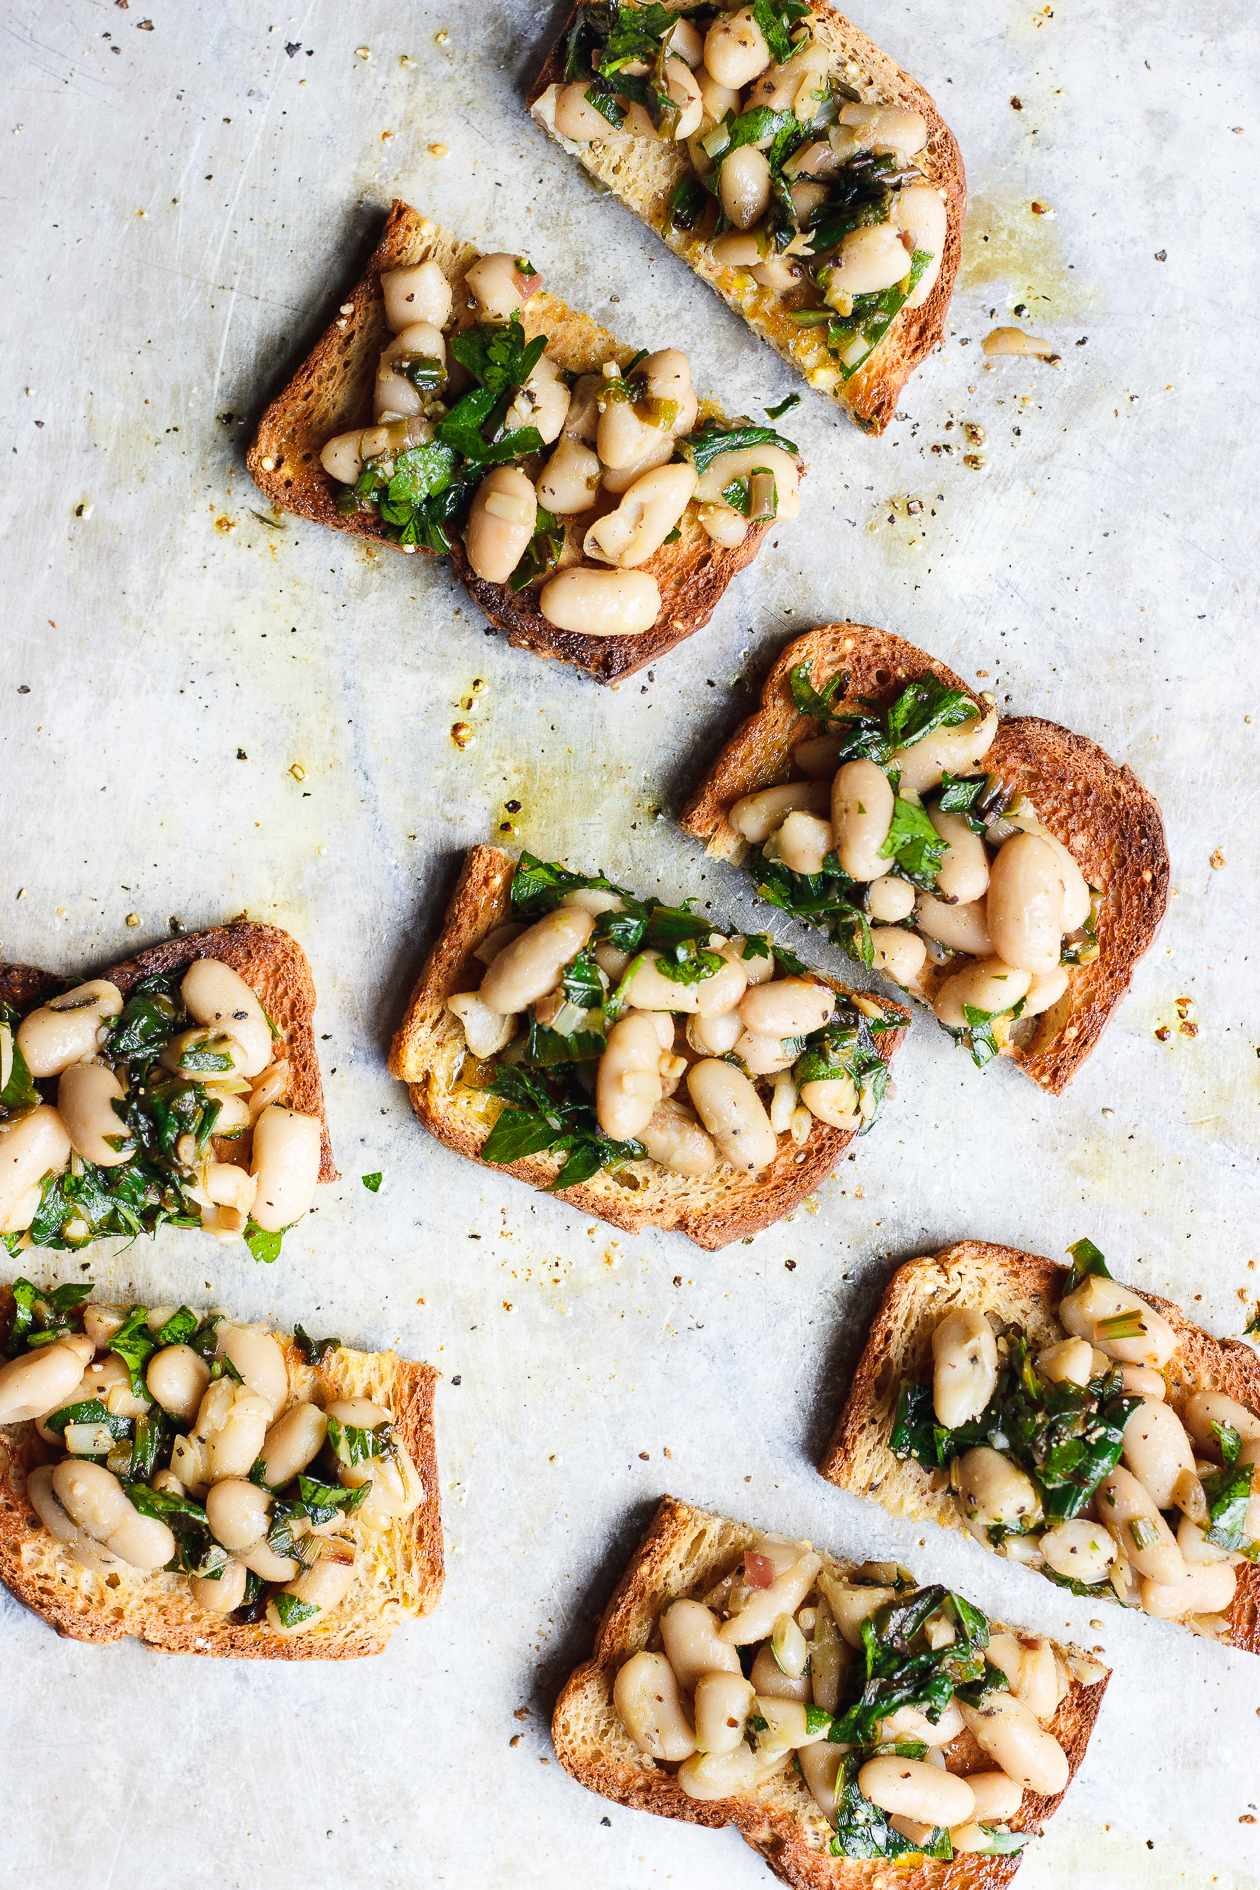 simple sautéed ramps with white beans on toast